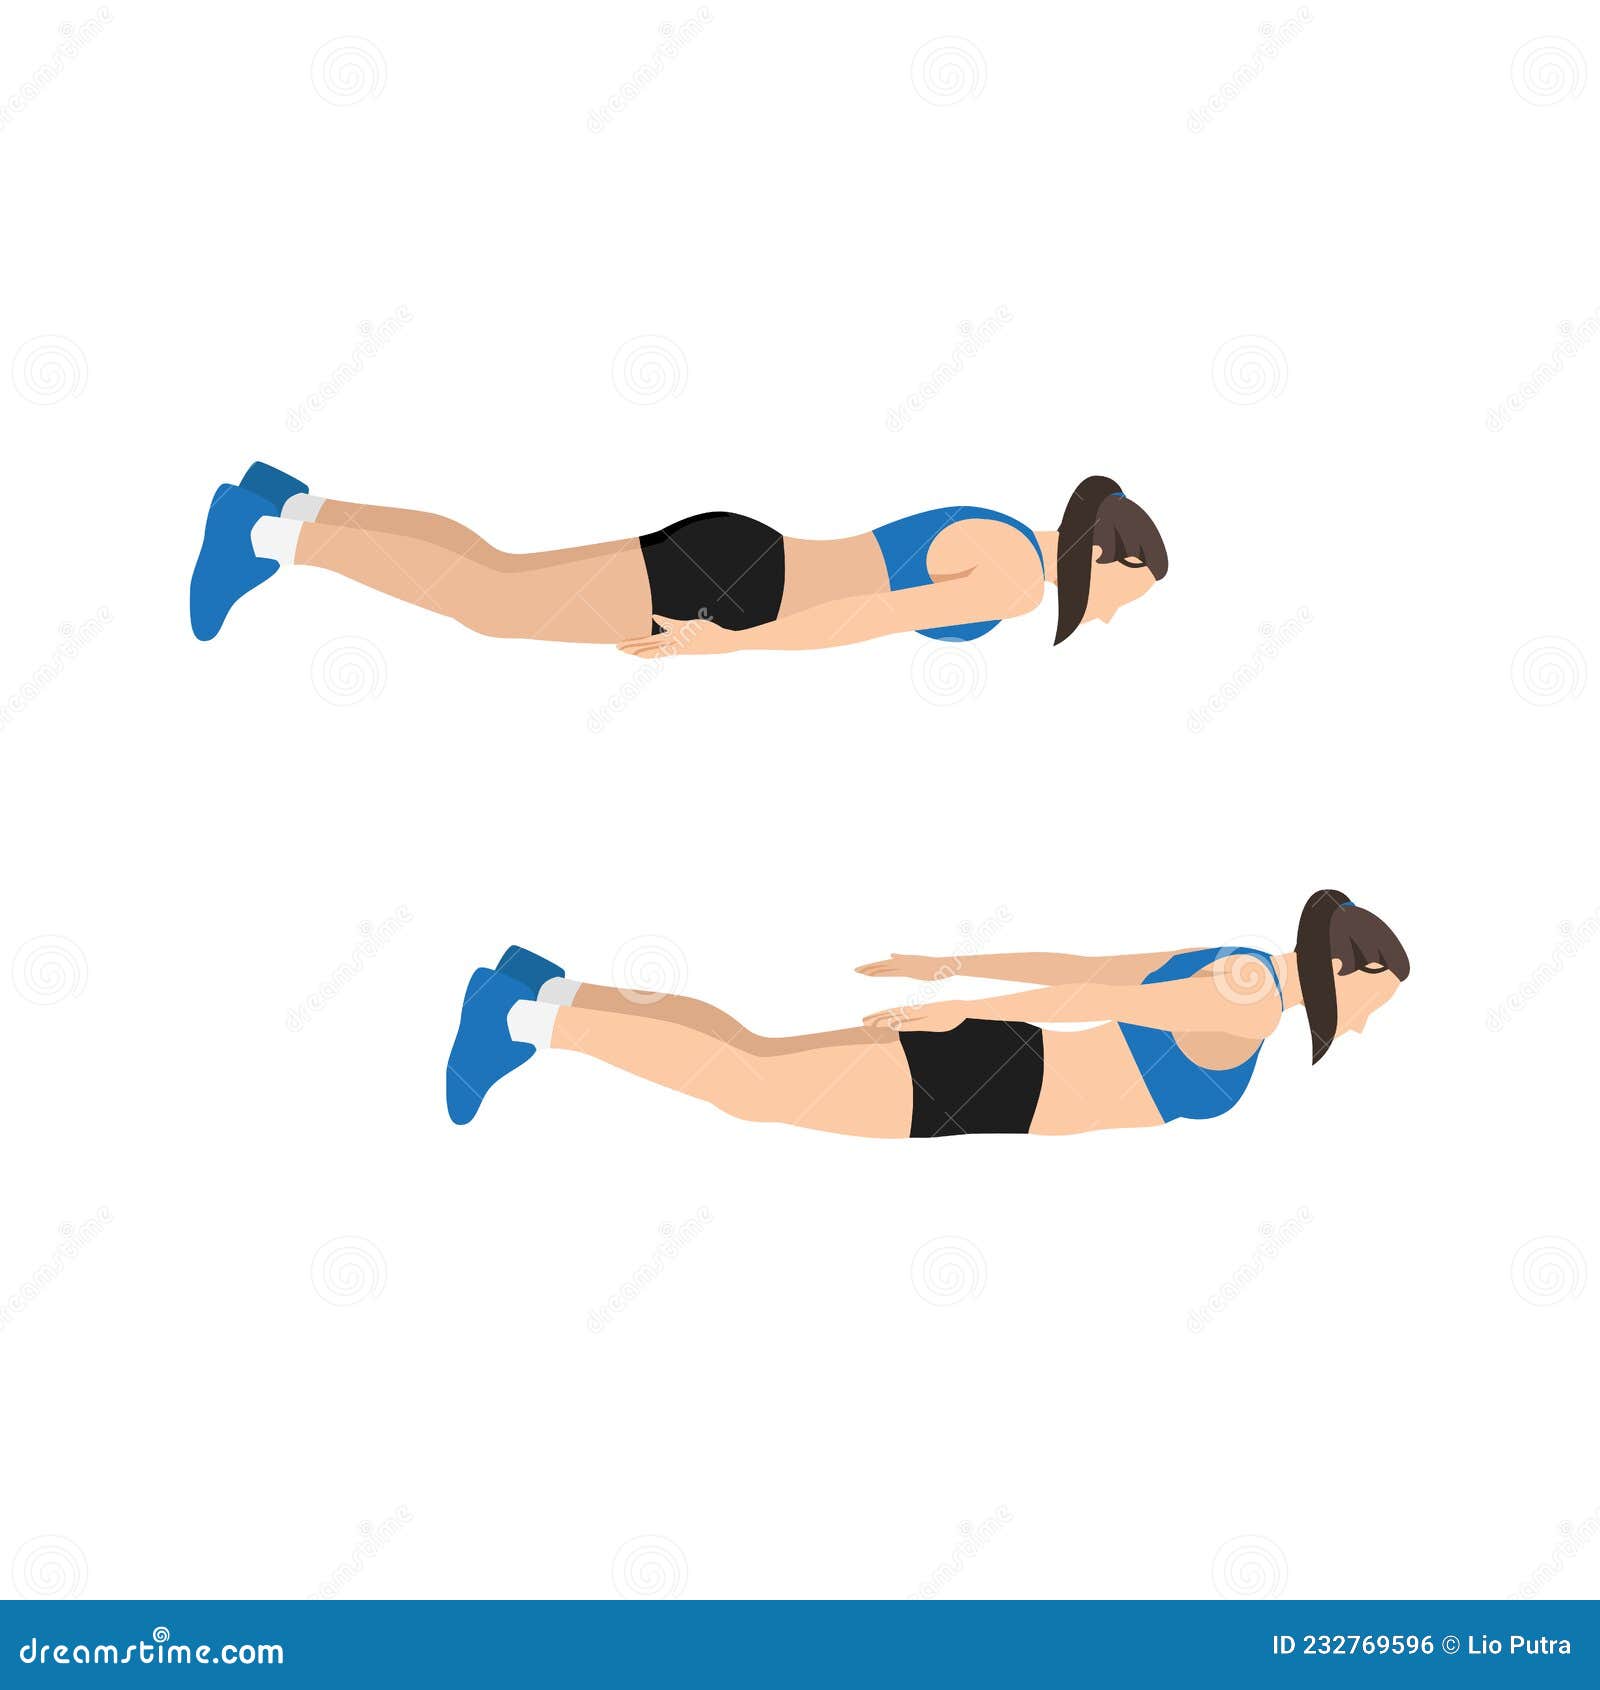 woman doing prone back extension exercise. flat 